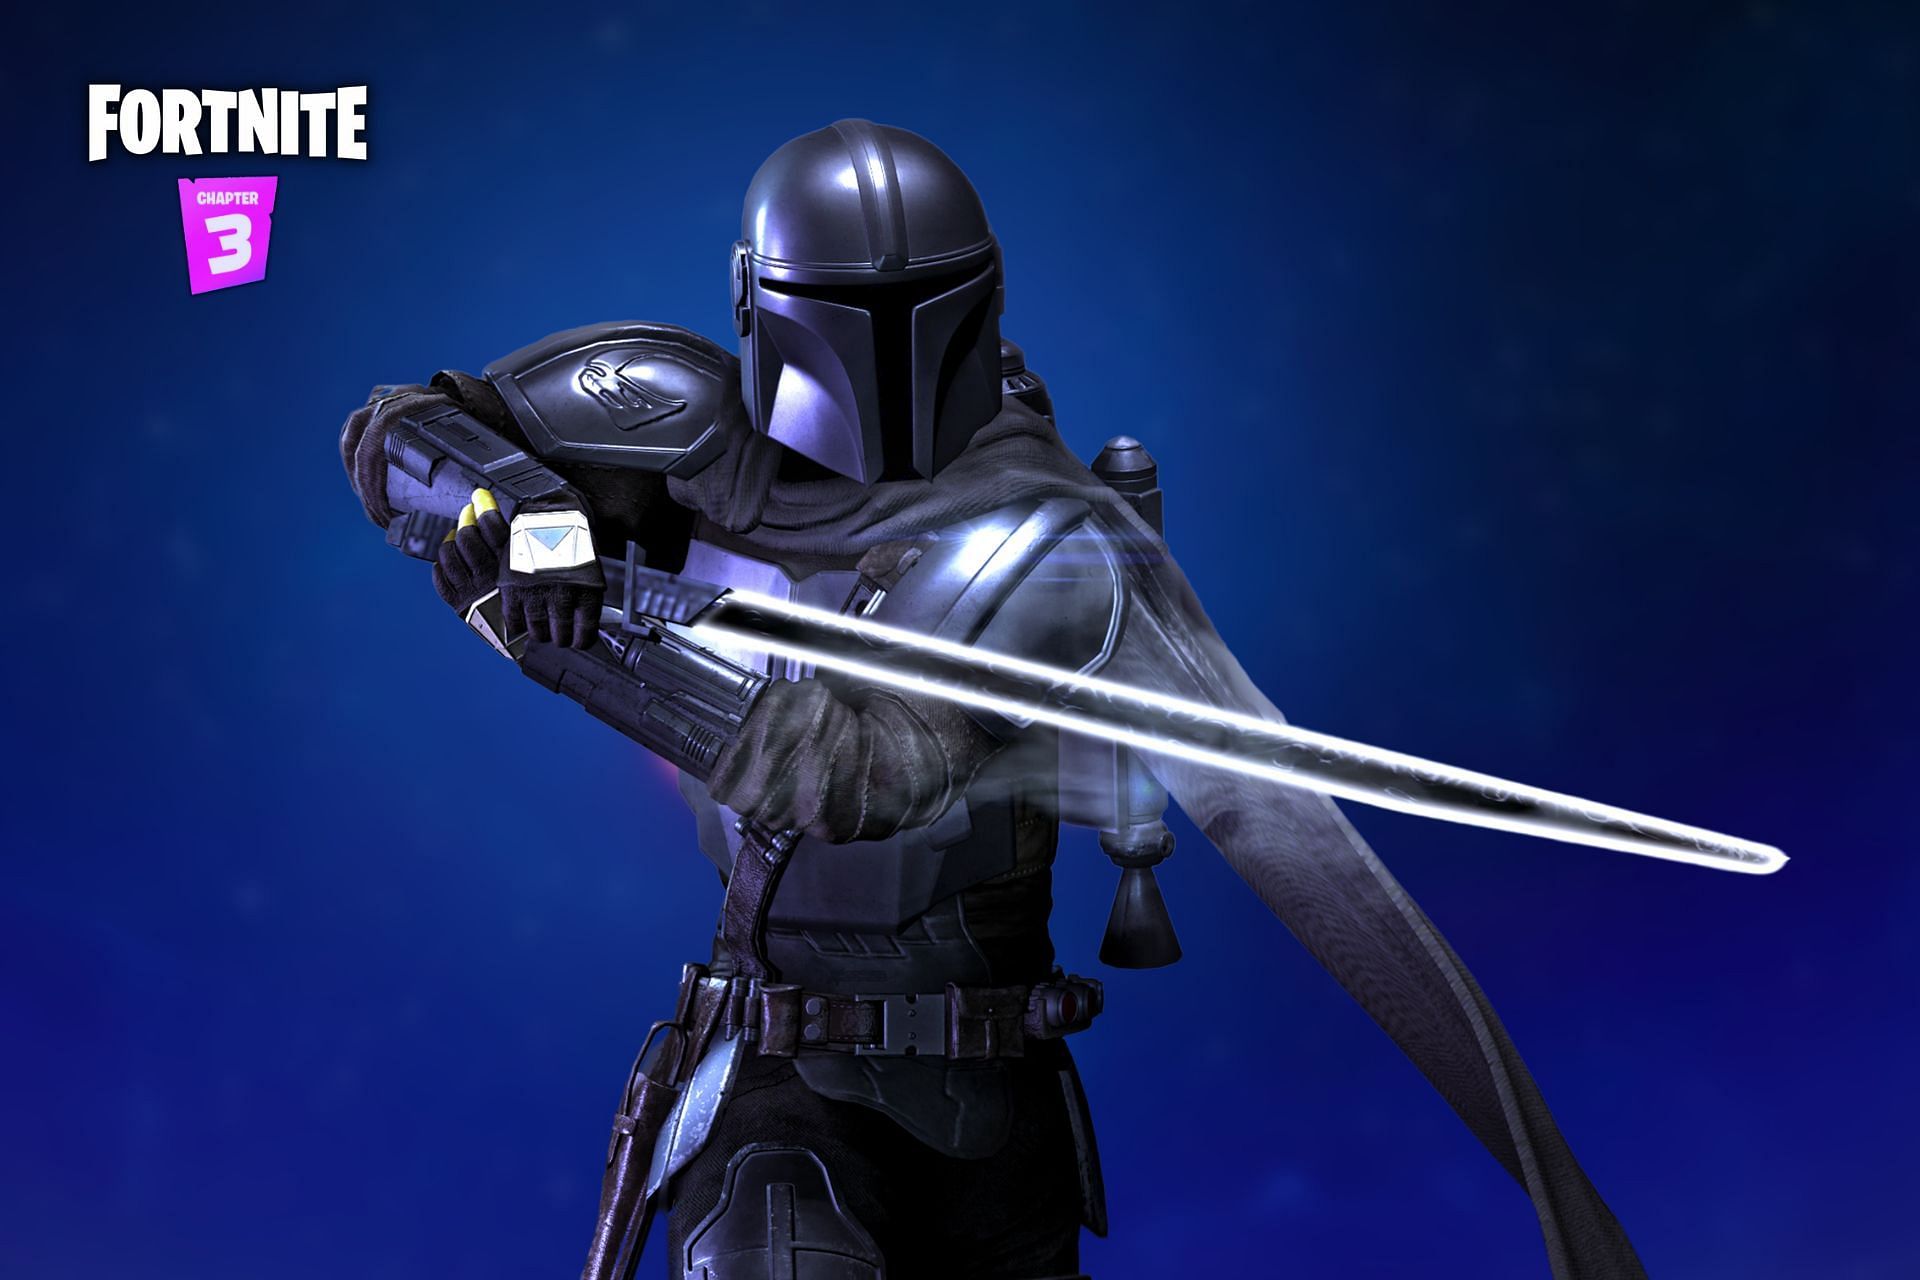 The Mandalorian's Darksaber may be coming to Fortnite Chapter 3 to